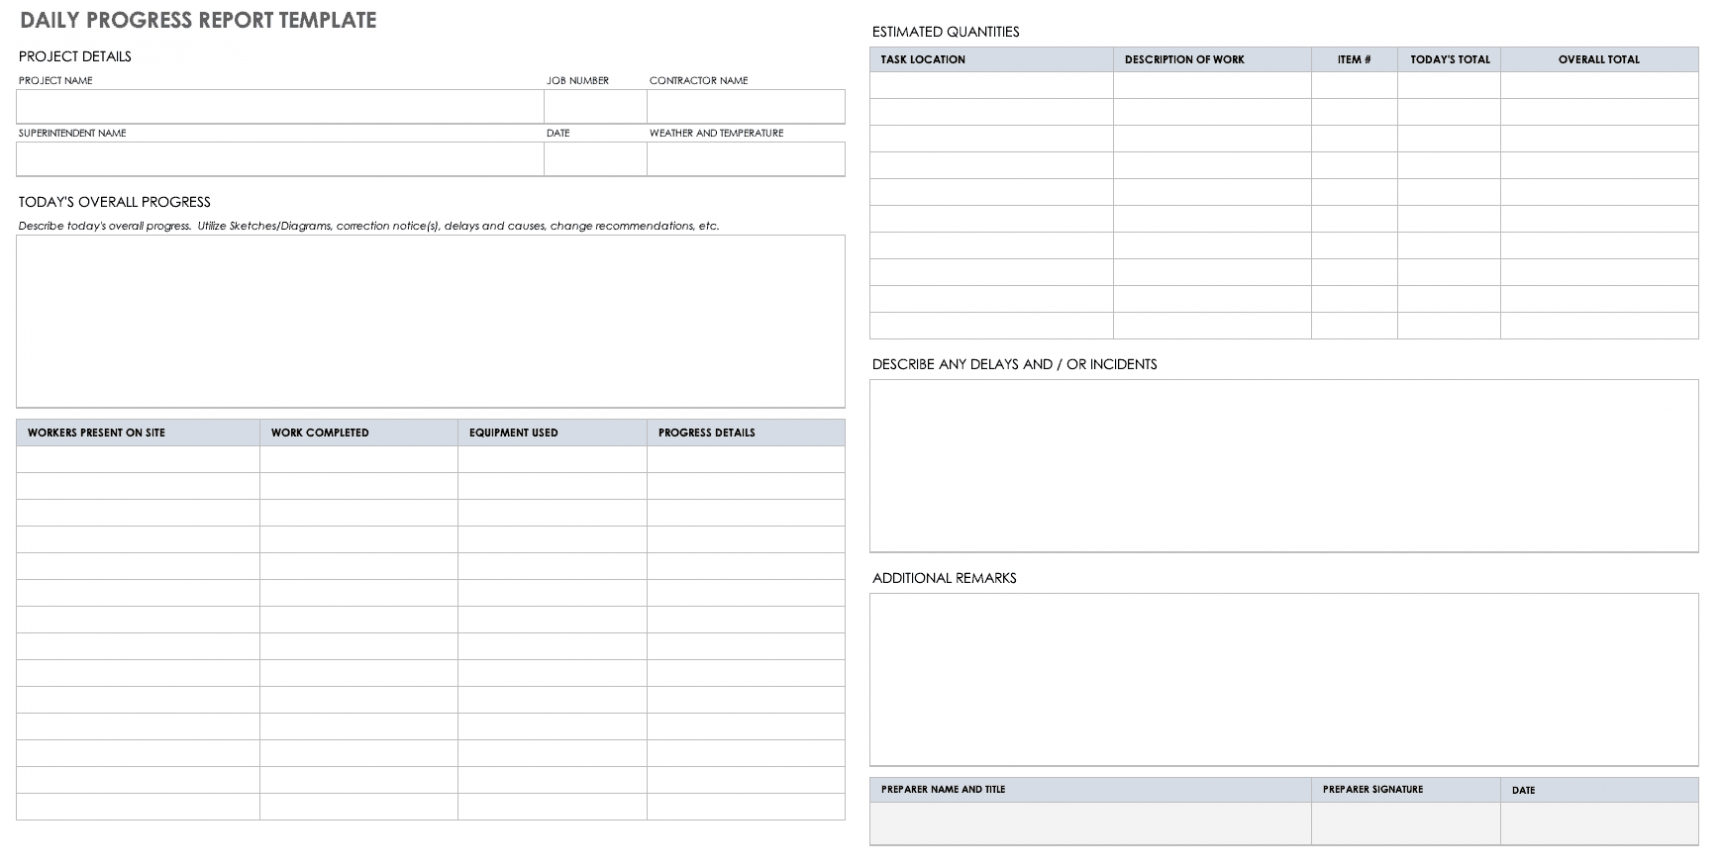 Free Project Report Templates | Smartsheet with regard to Activity Report Template Word